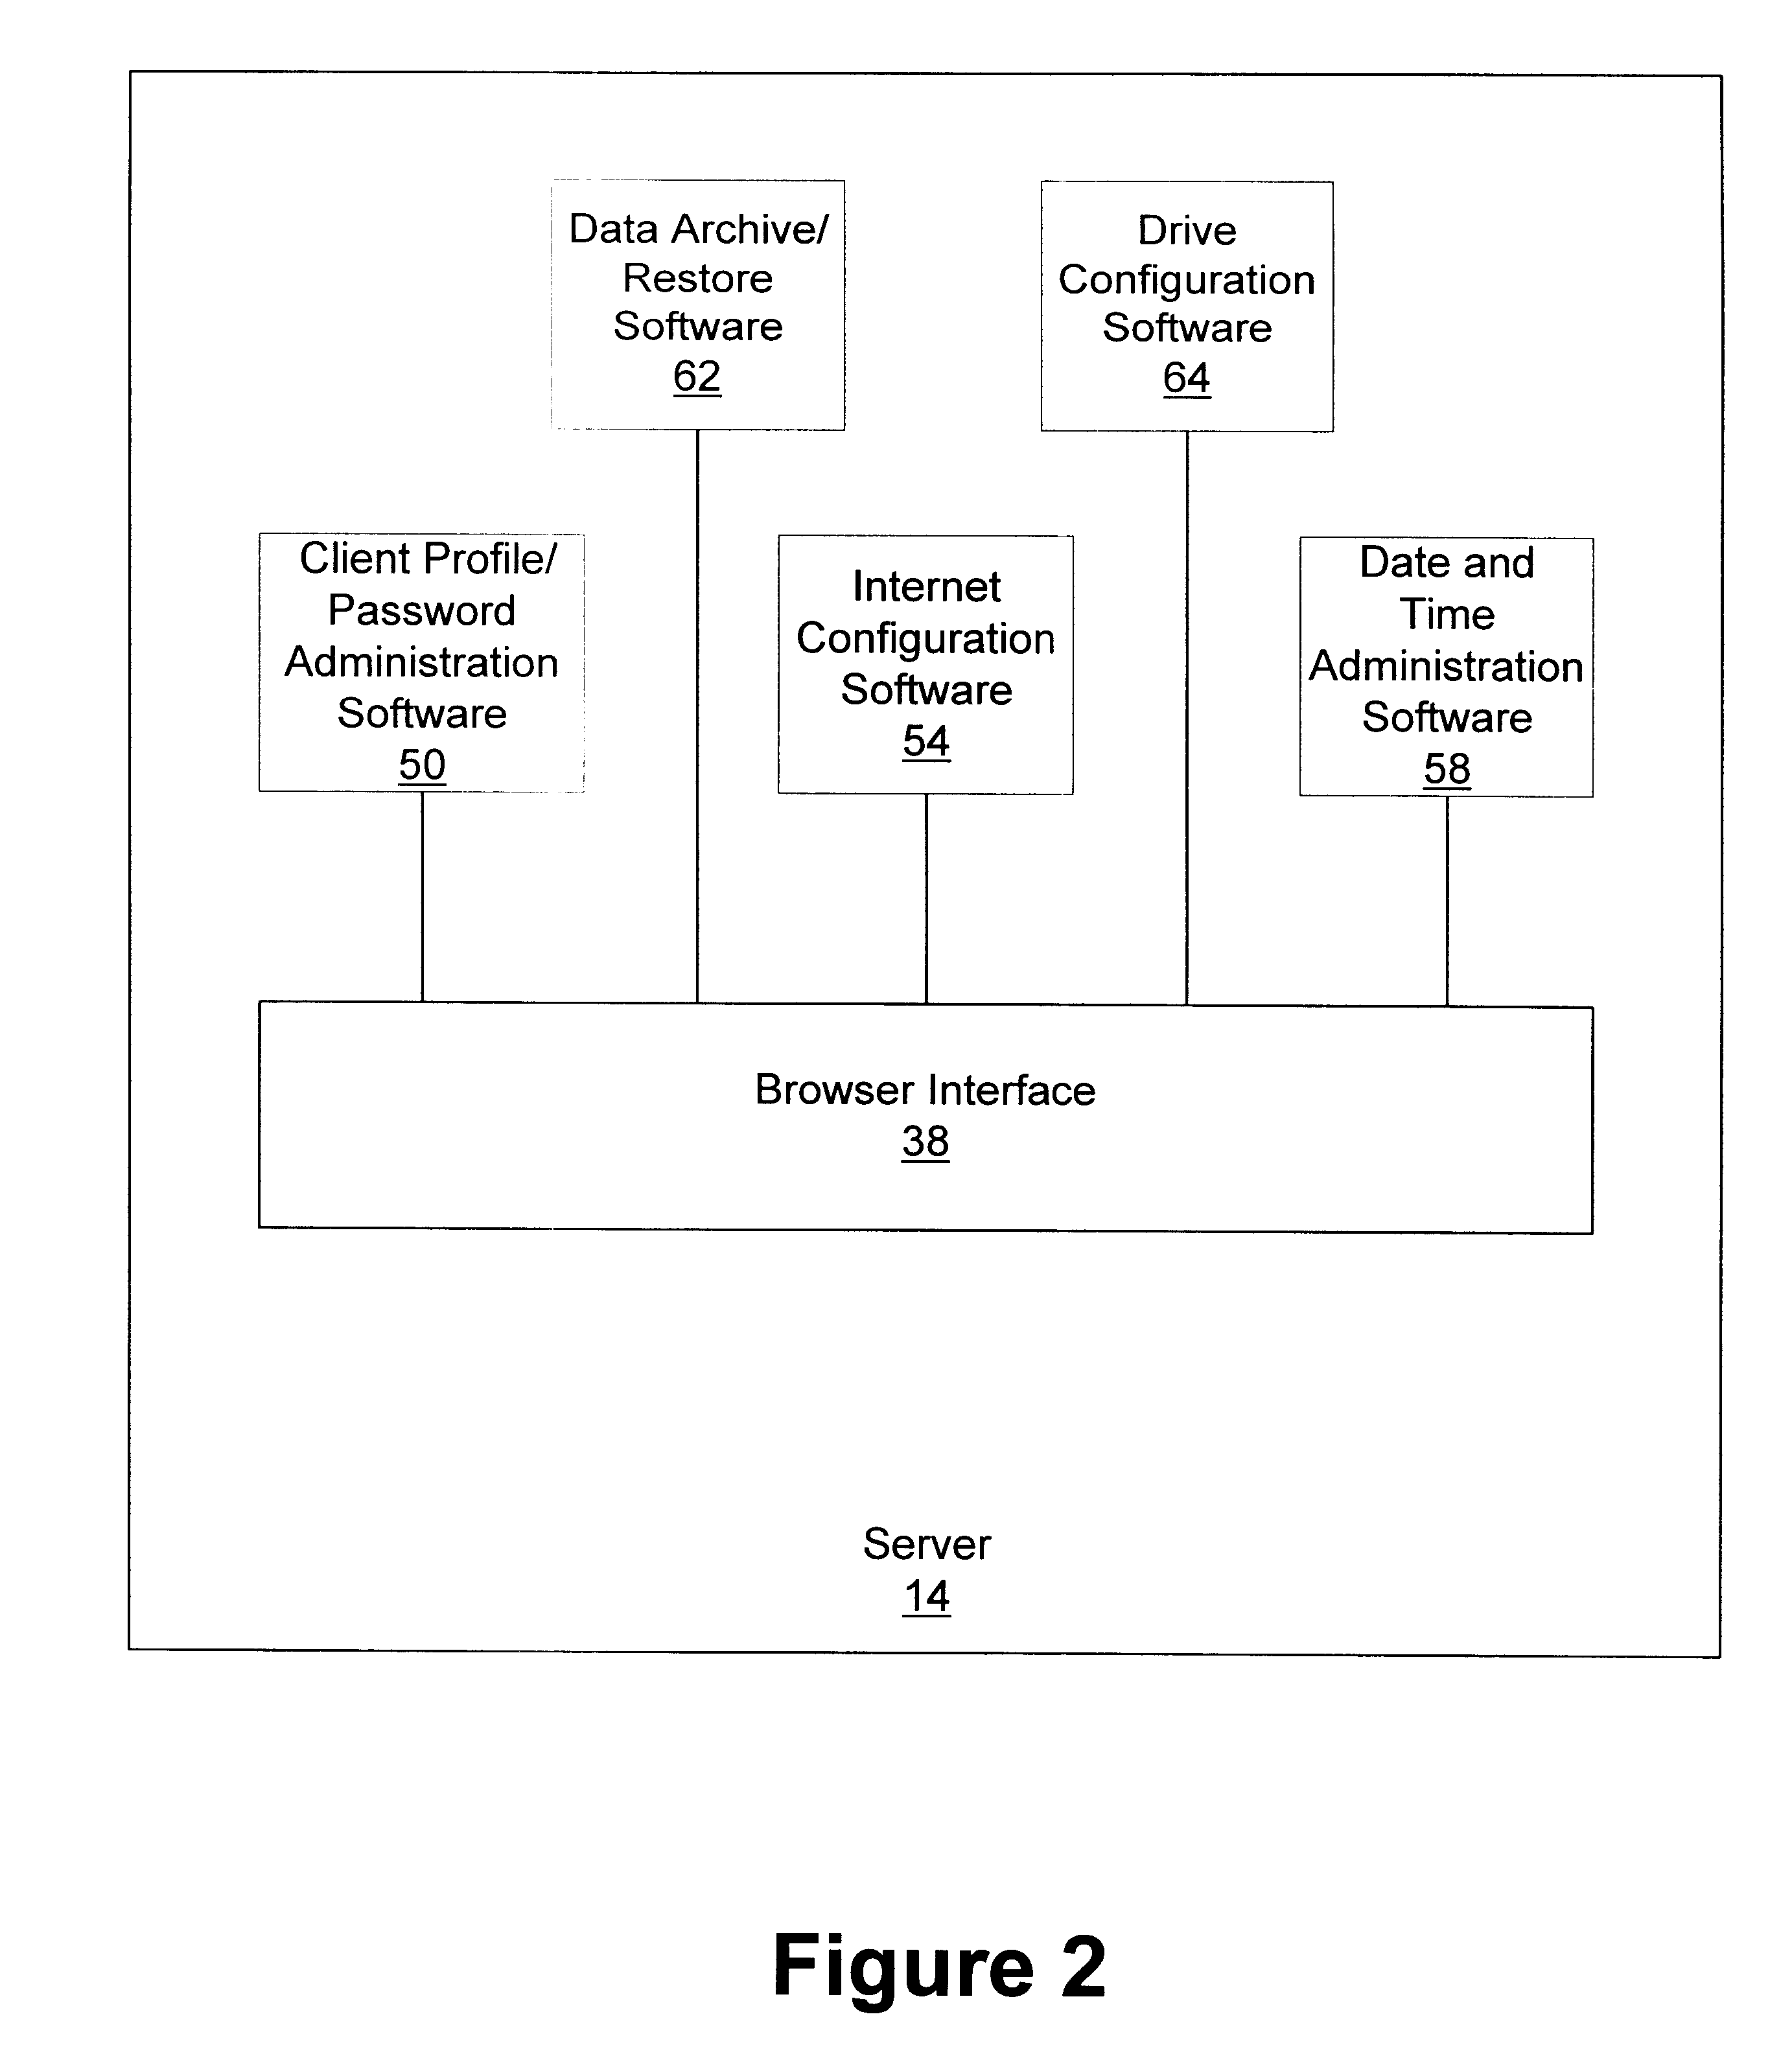 Method and apparatus for configuring storage devices